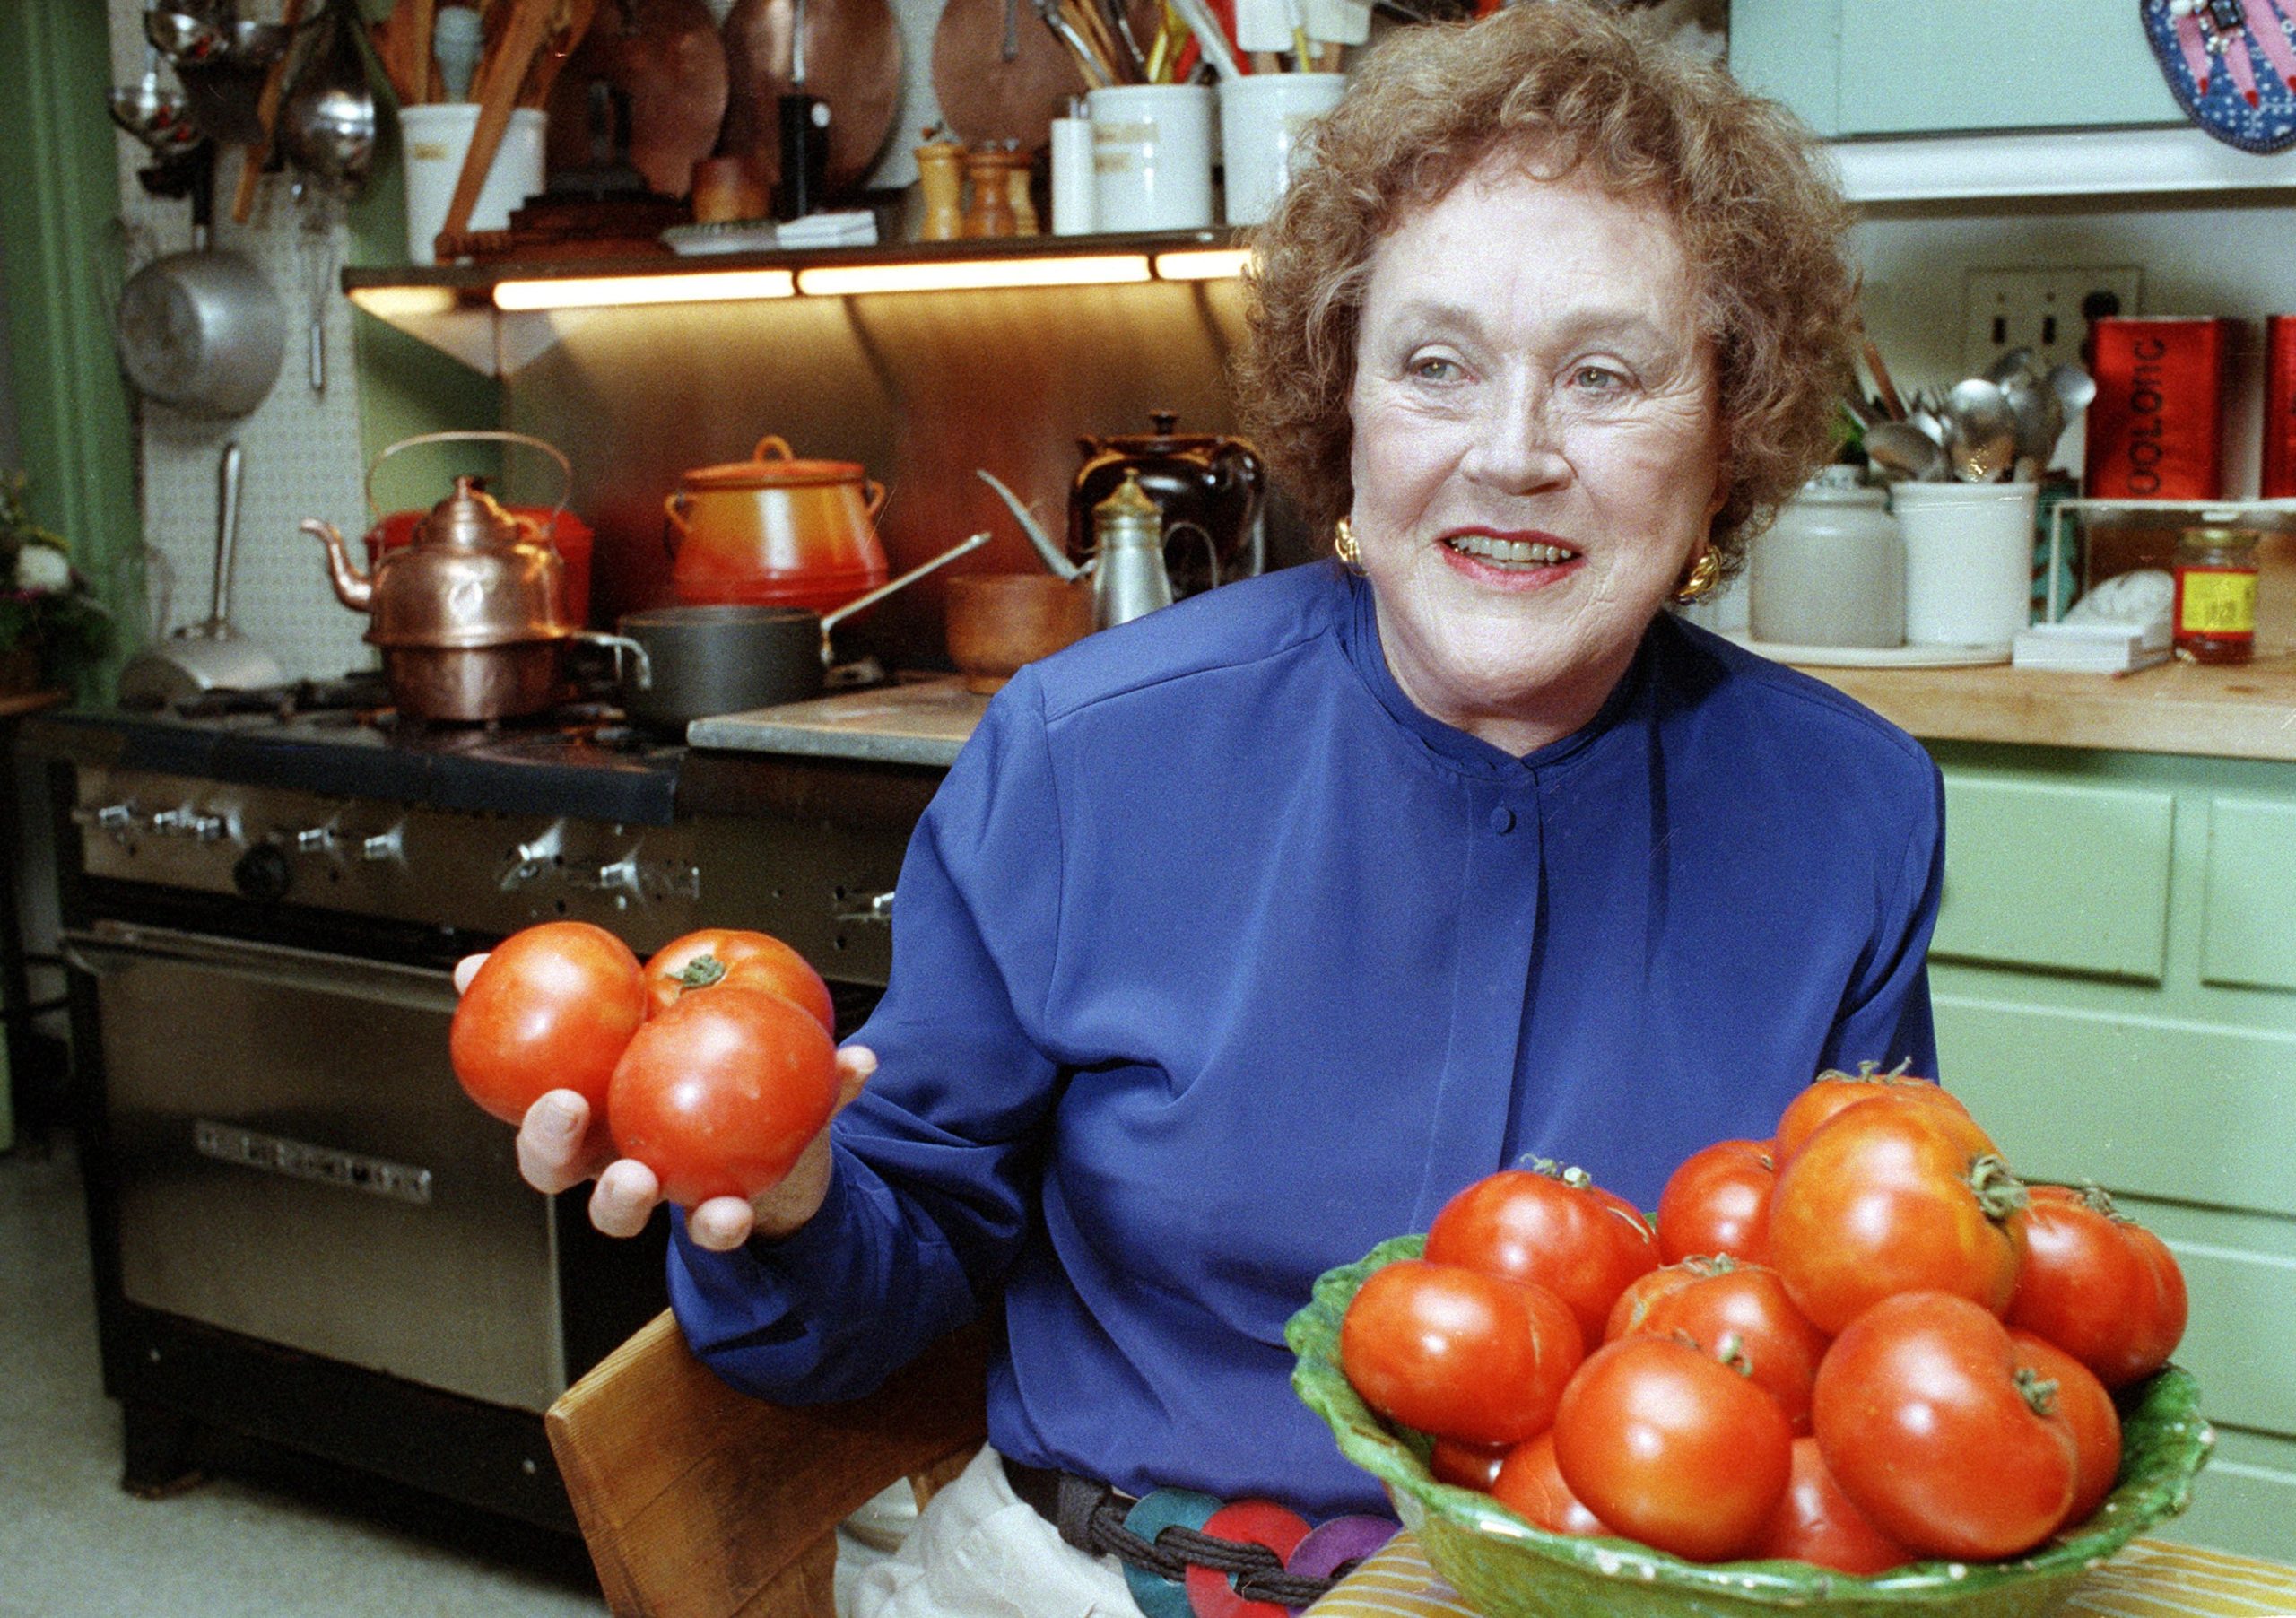 In this Aug. 13, 1992 photo, chef and author Julia Child holds tomatoes in the kitchen of her home in Cambridge, Mass. (Photo: Jon Chase, AP)